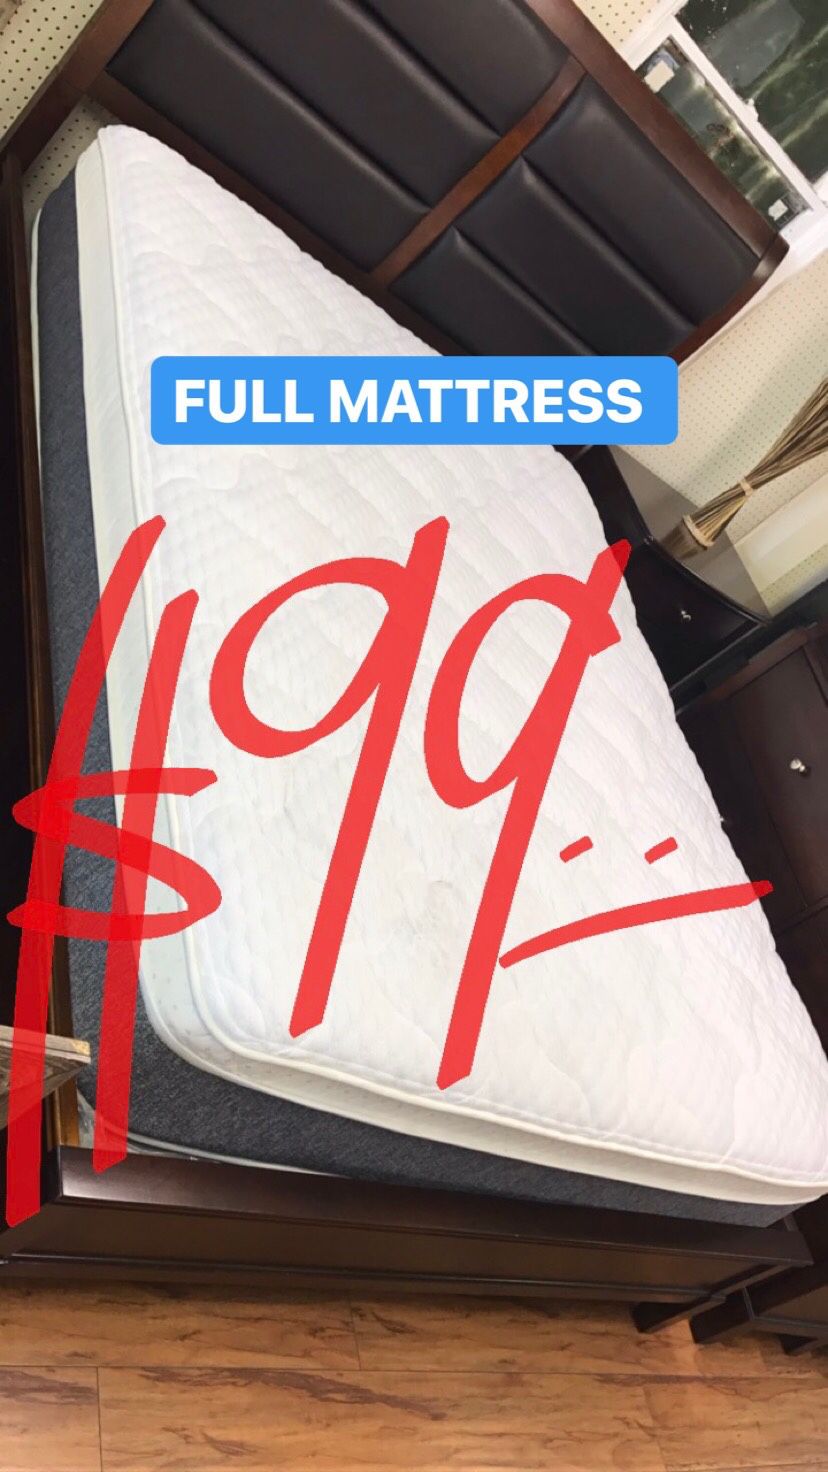 BRAND NEW PILLOW TOP MATTRESSES💯 COLCHONES NUEVOS PILLOW TOP 💯 Queen $120 ❌ $180 With Box Spring 💥💥 FULL SIZE $100 ❌ $150 With Box Spring💥 Twin